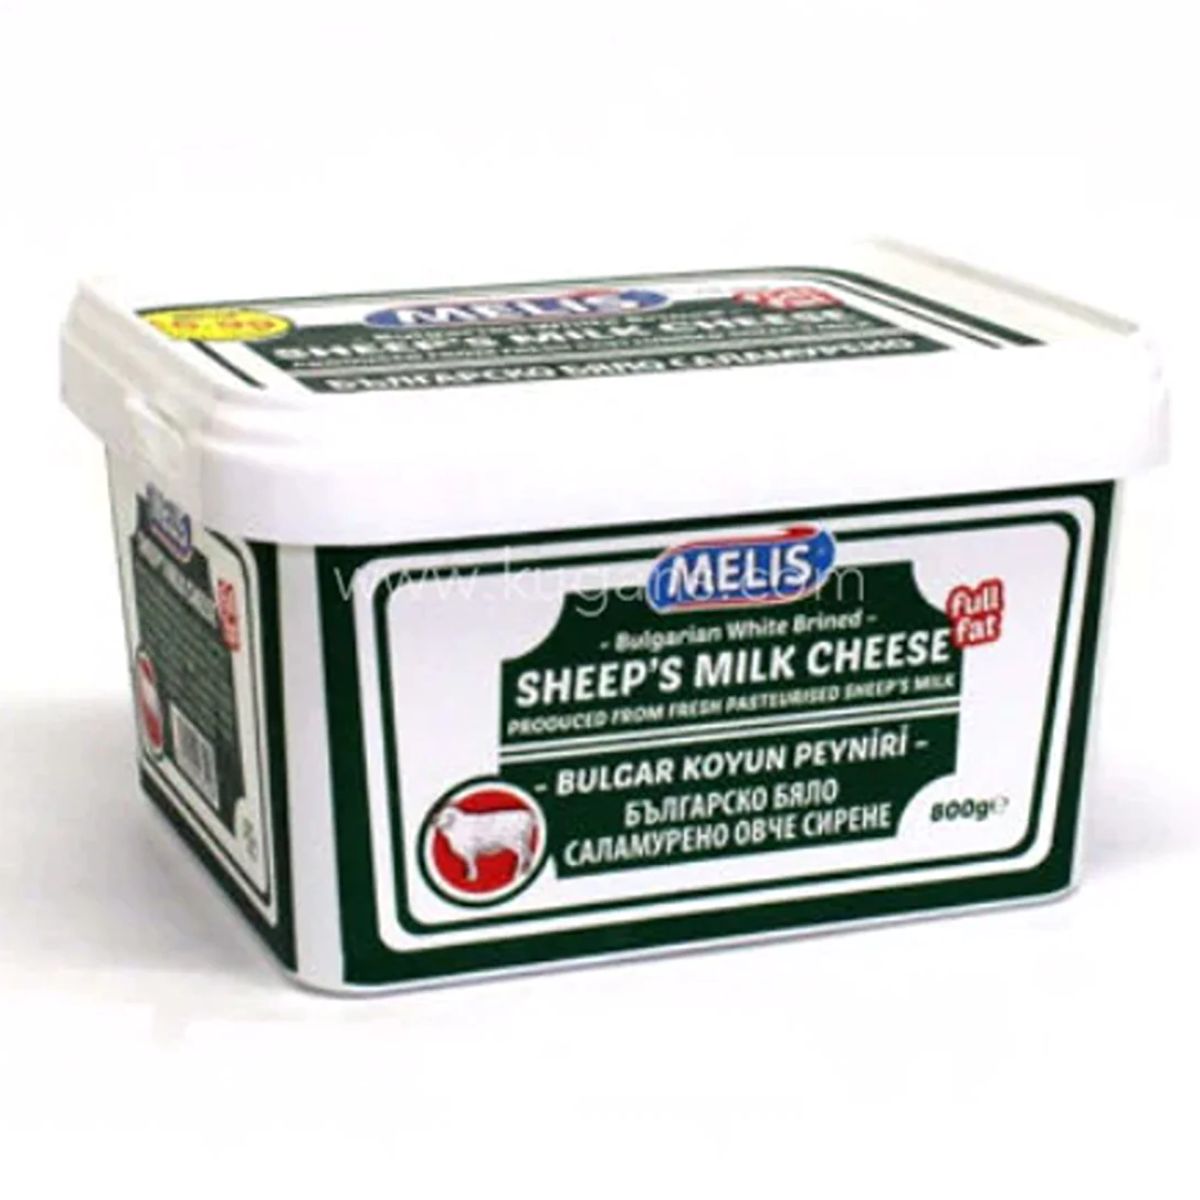 A container of Melis Bulgarian Sheep Cheese - 400g.